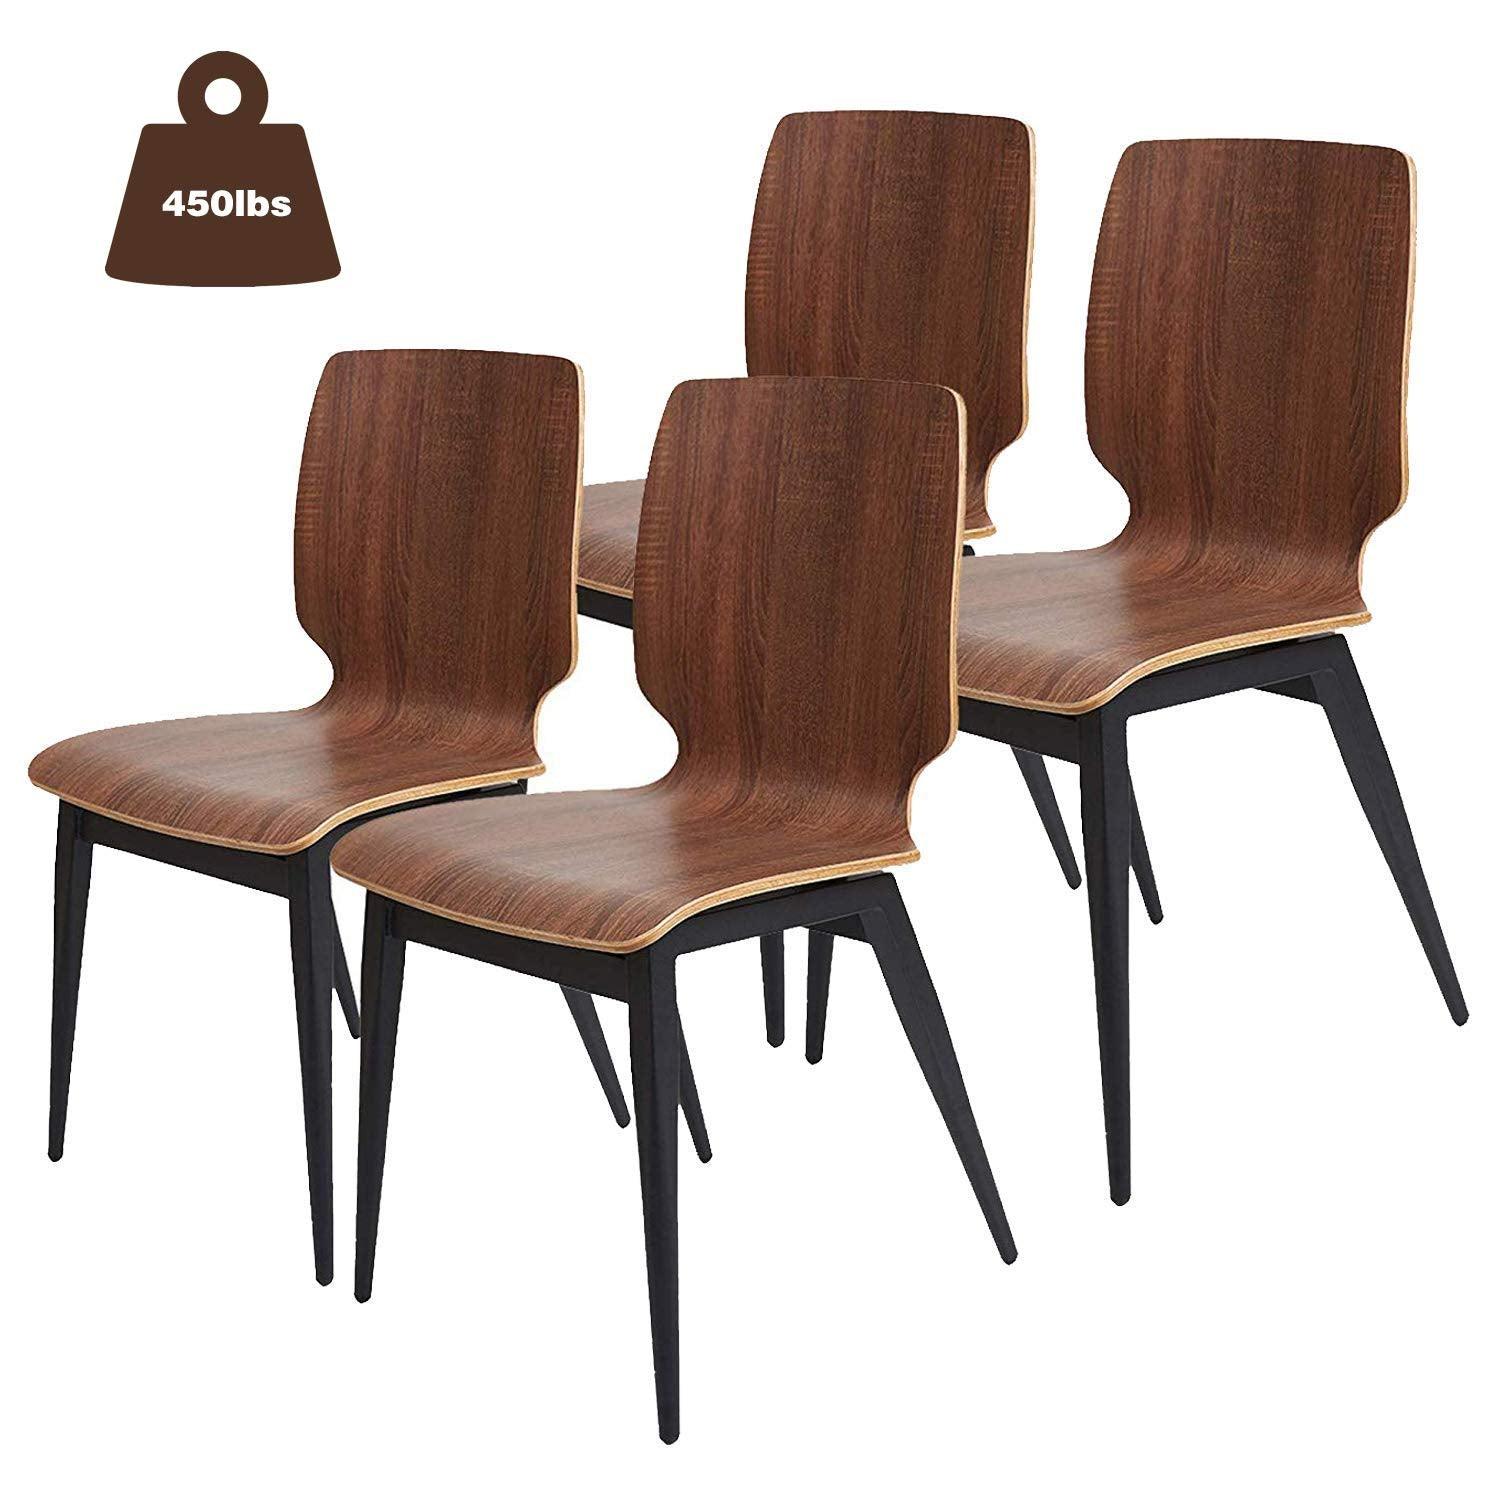 Set of 4 Modern Dining Chairs Wooden Kitchen Side Chairs with Metal Legs, Brown